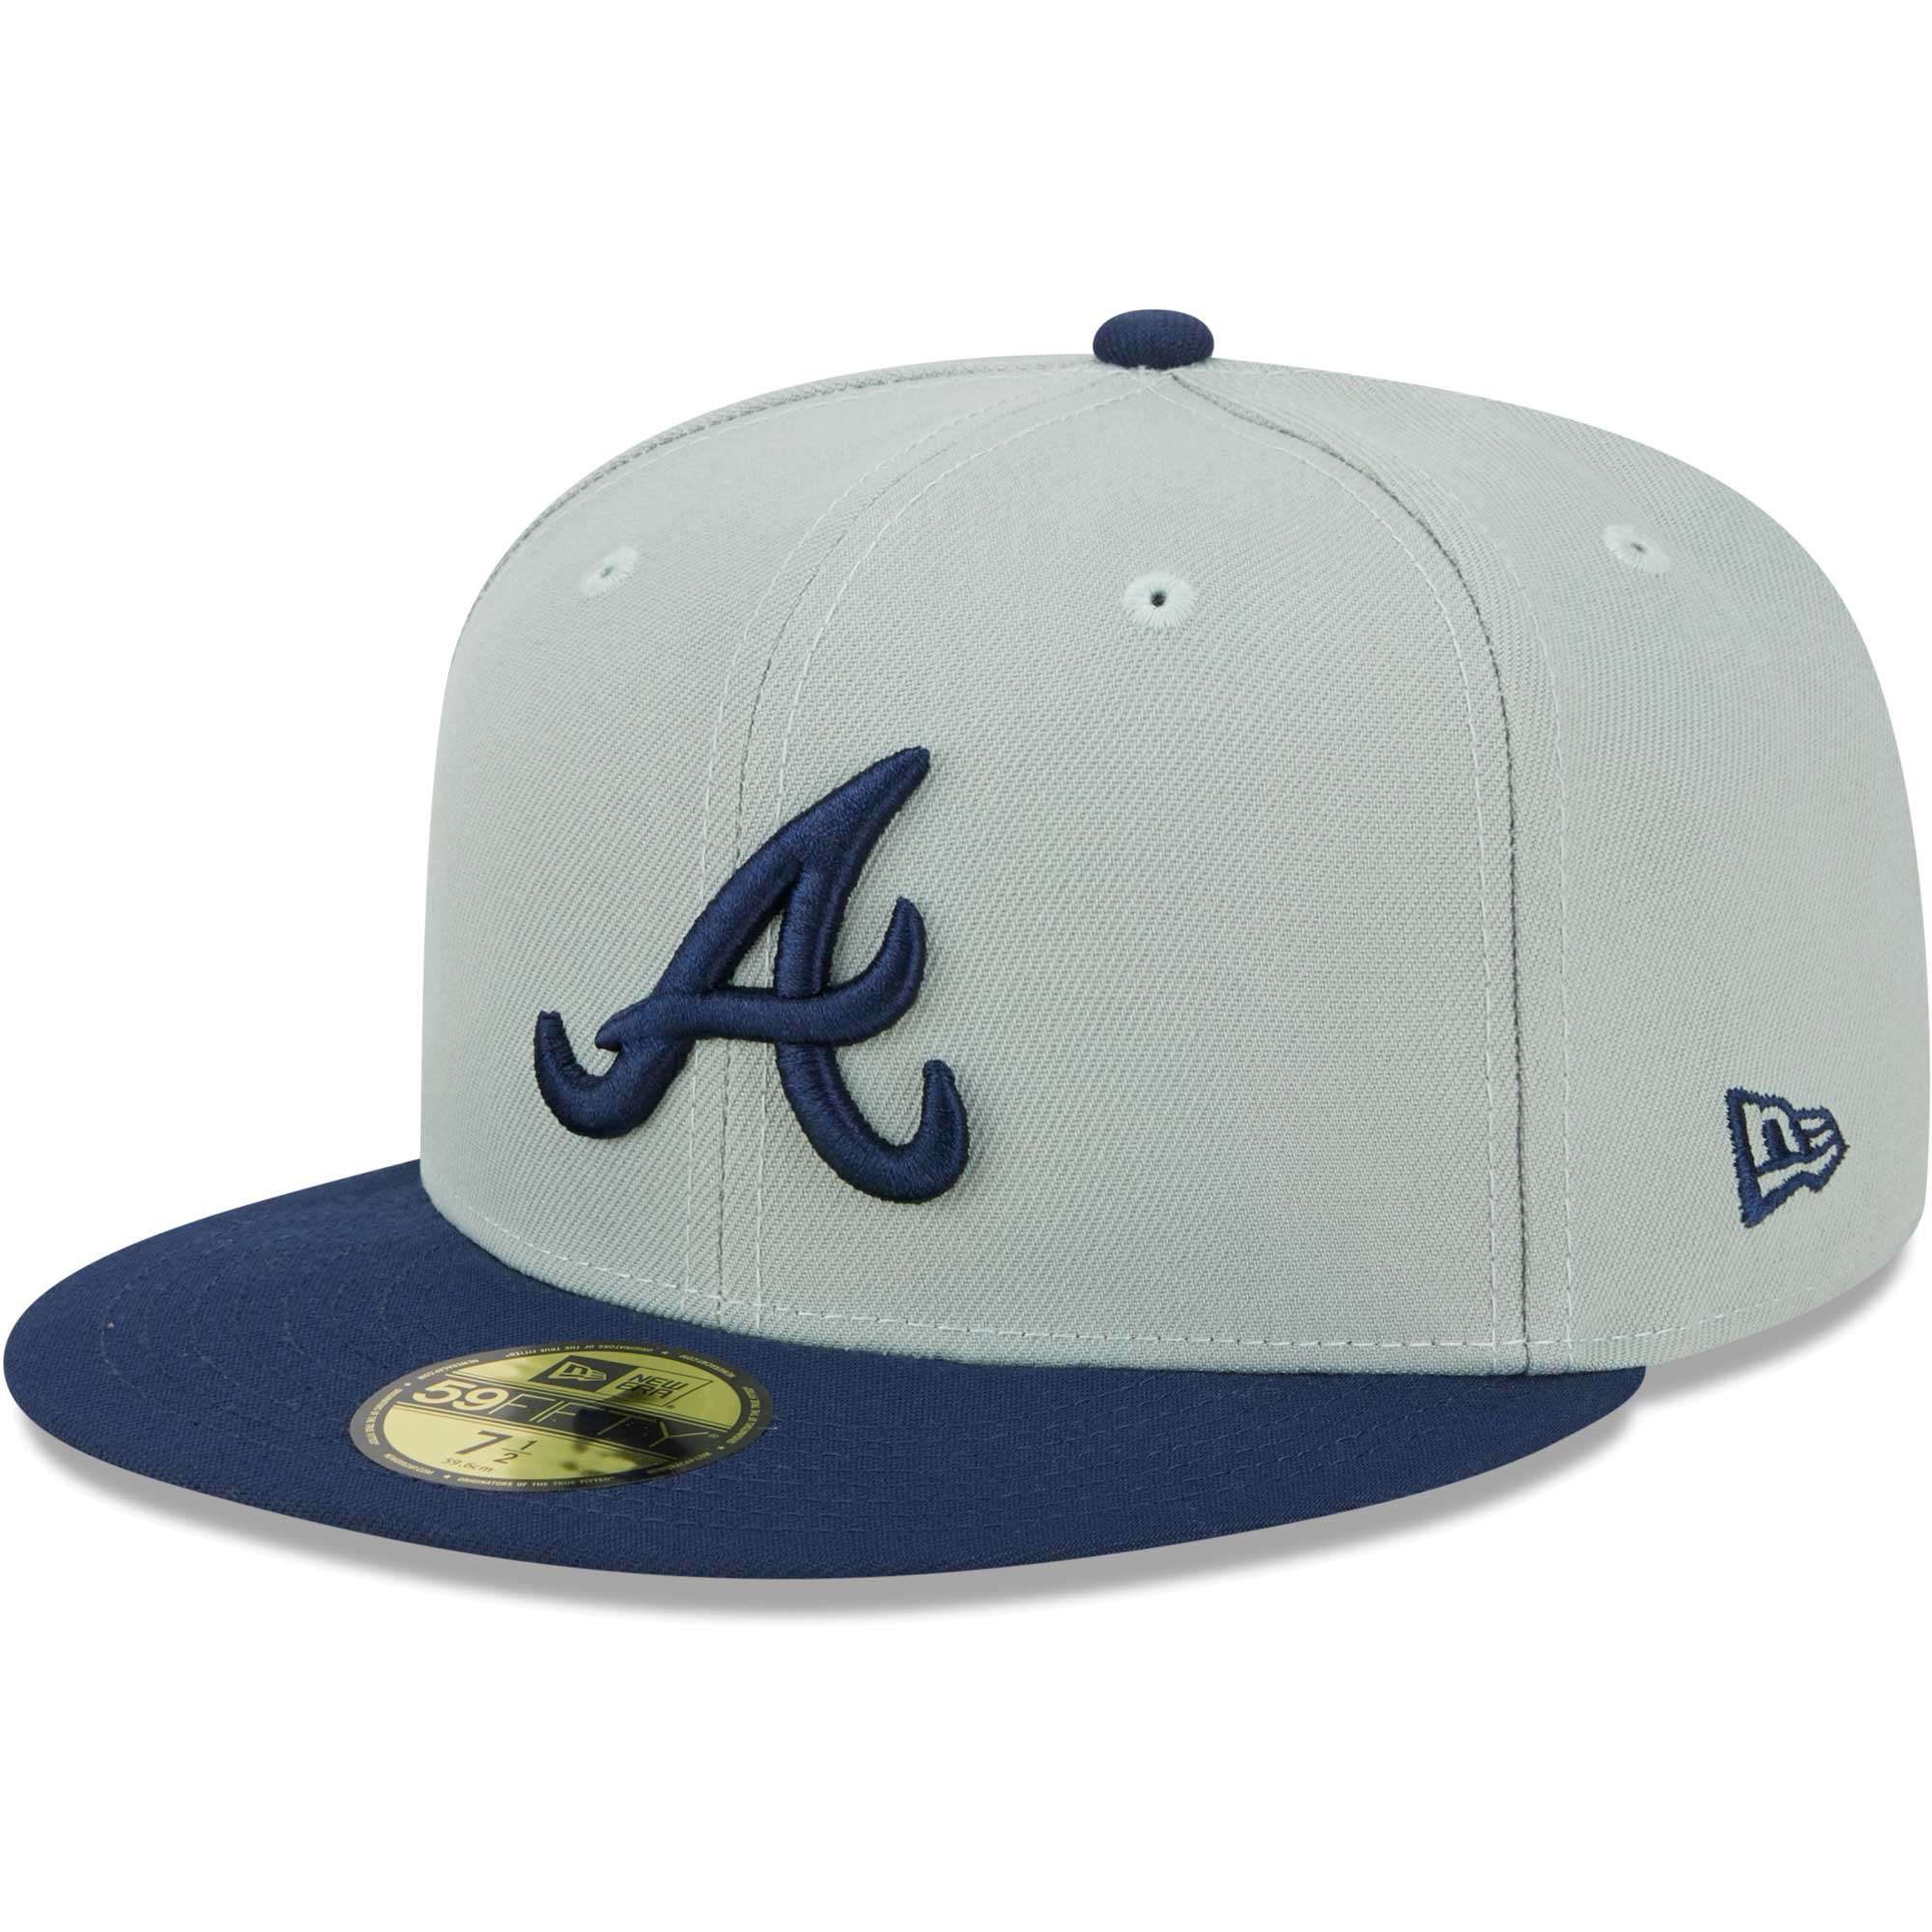 Men's Mitchell & Ness Royal Atlanta Braves Cooperstown Collection Circle Change Trucker Adjustable Hat